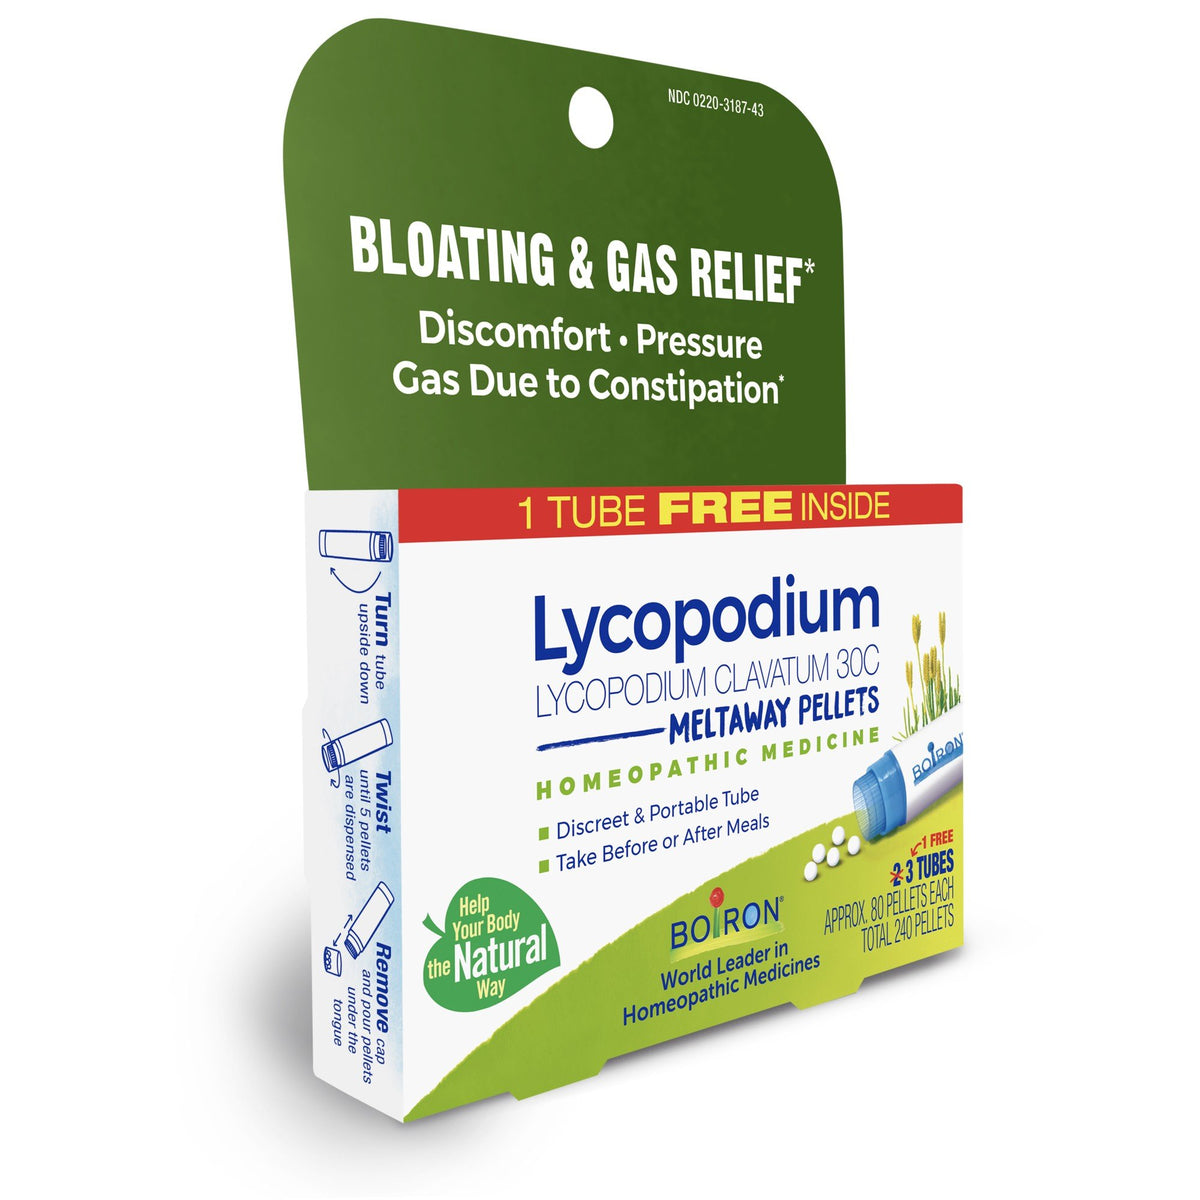 Boiron Lycopodium Clavatum 30C 3 MDT Homeopathic Medicine For Bloating &amp; Gas Relief 3 Pack Pellet